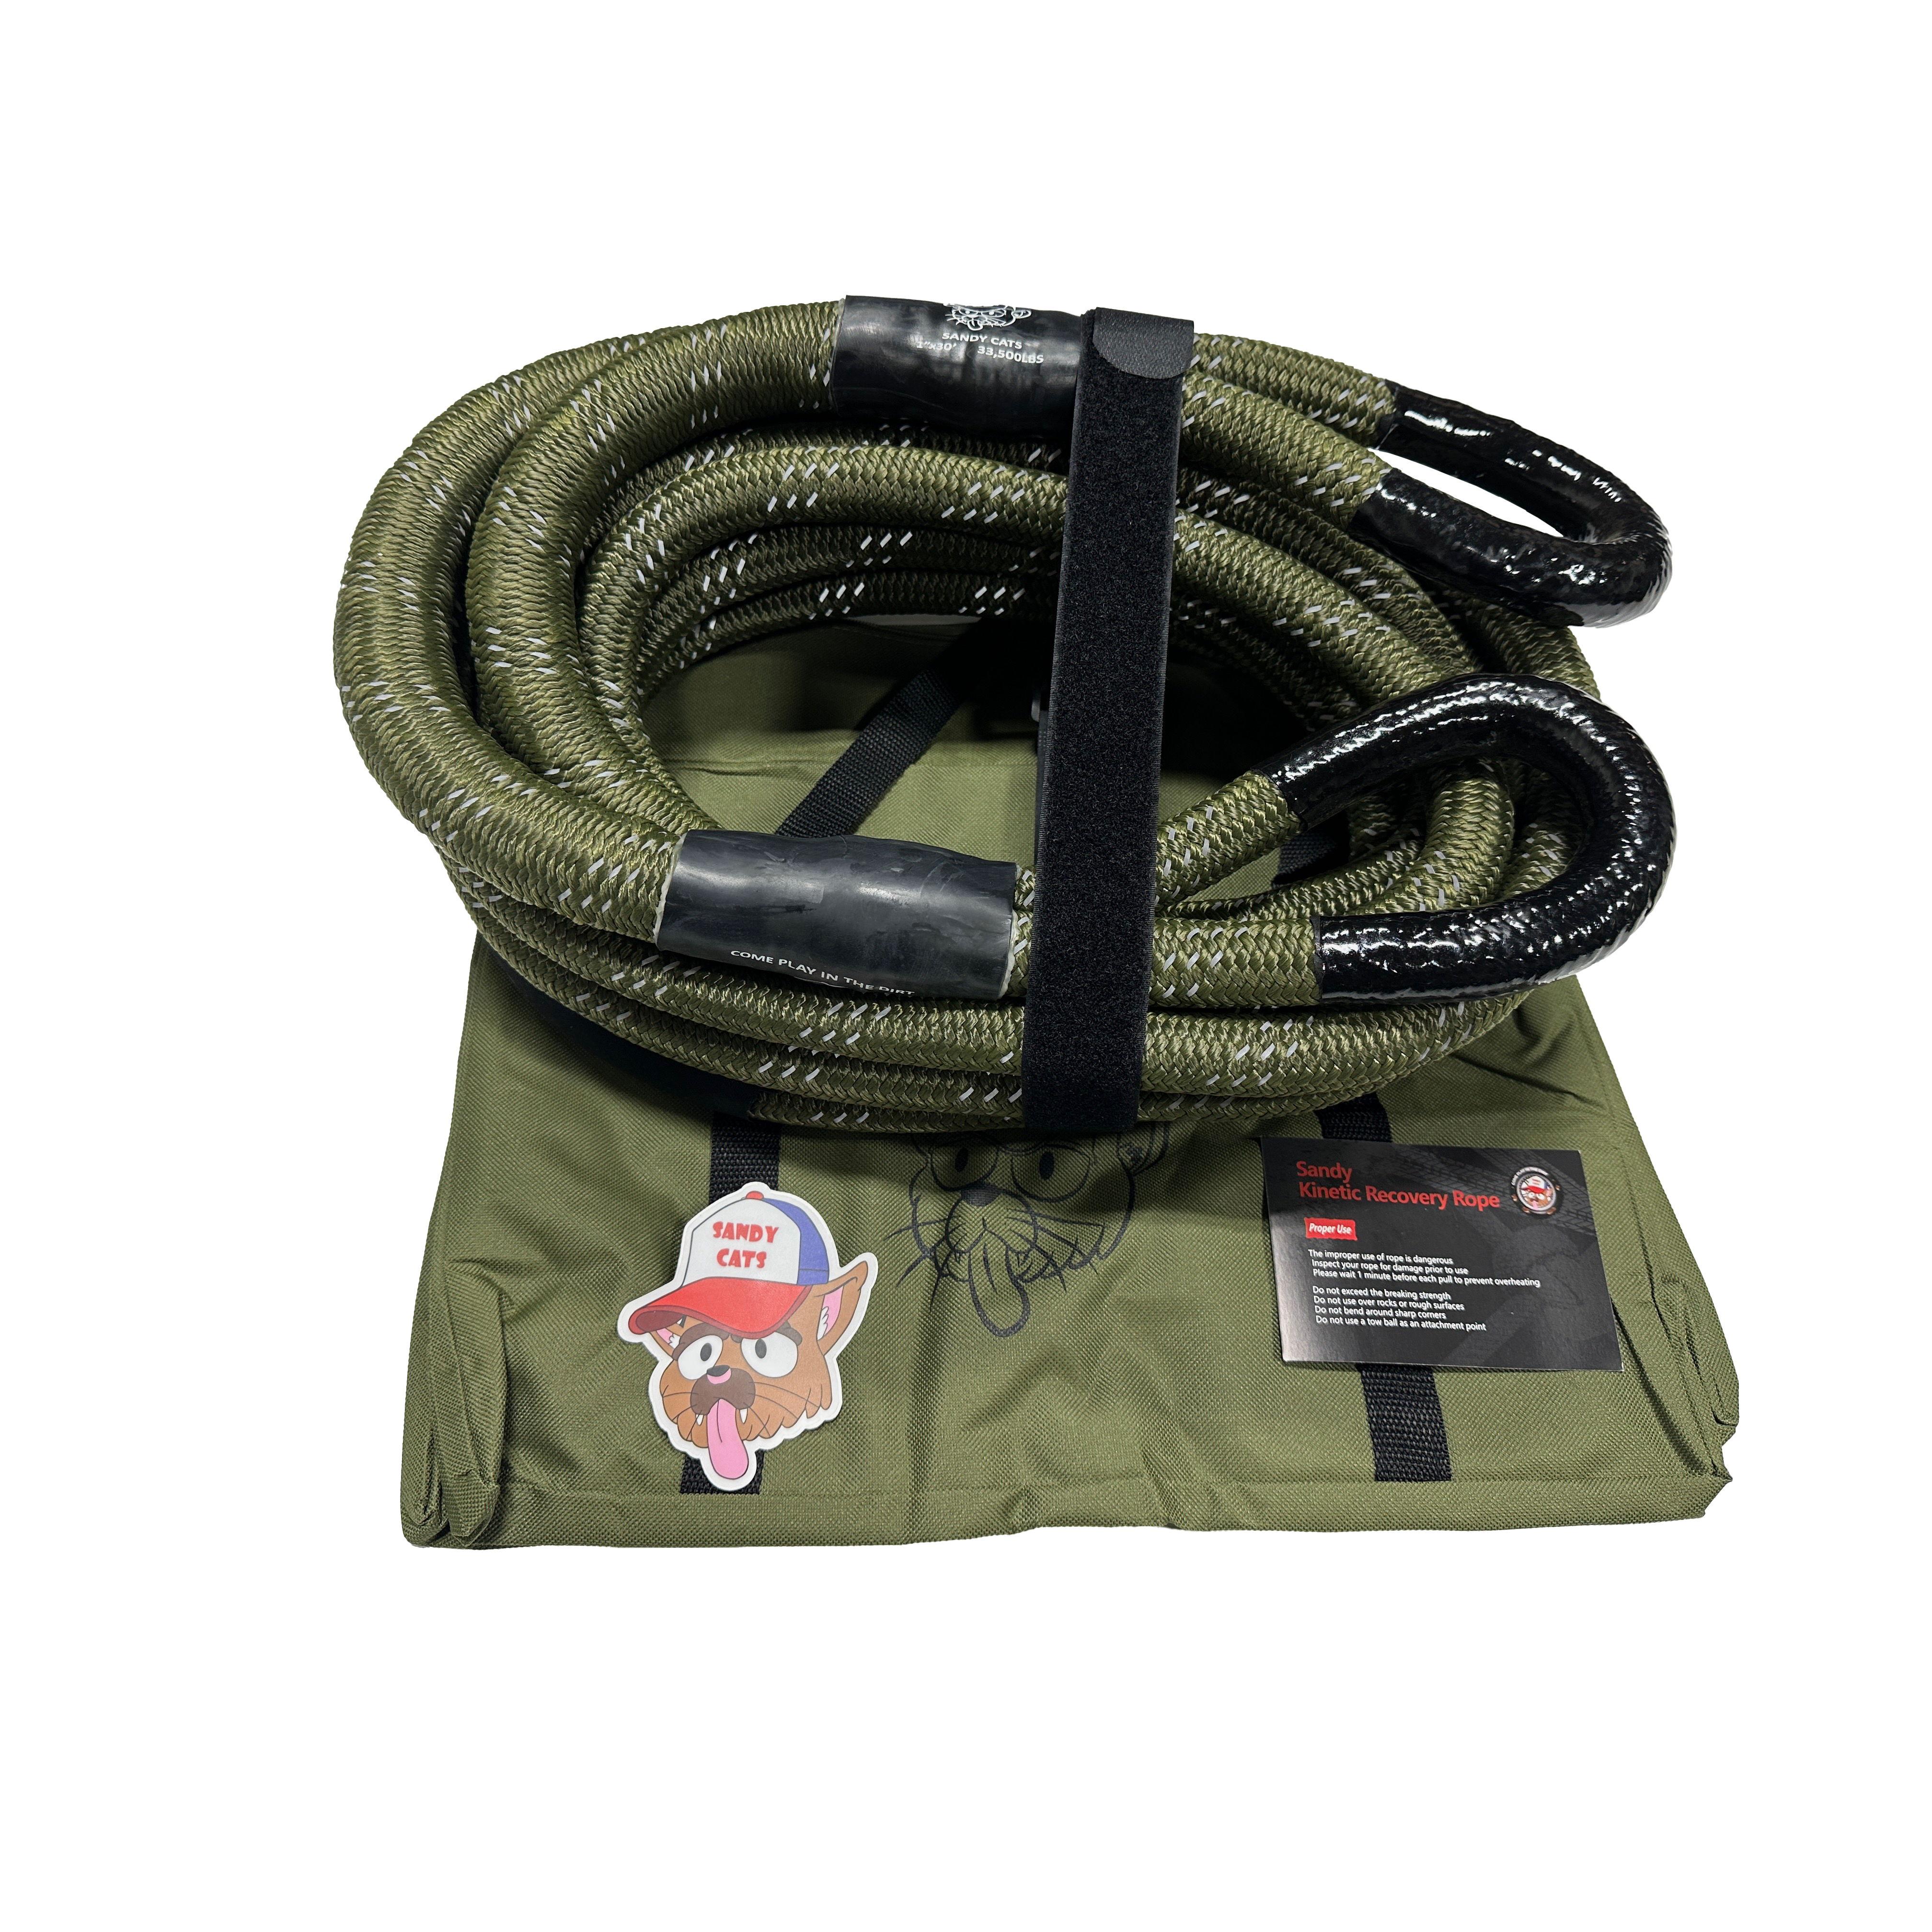 Kinetic-X Recovery Rope